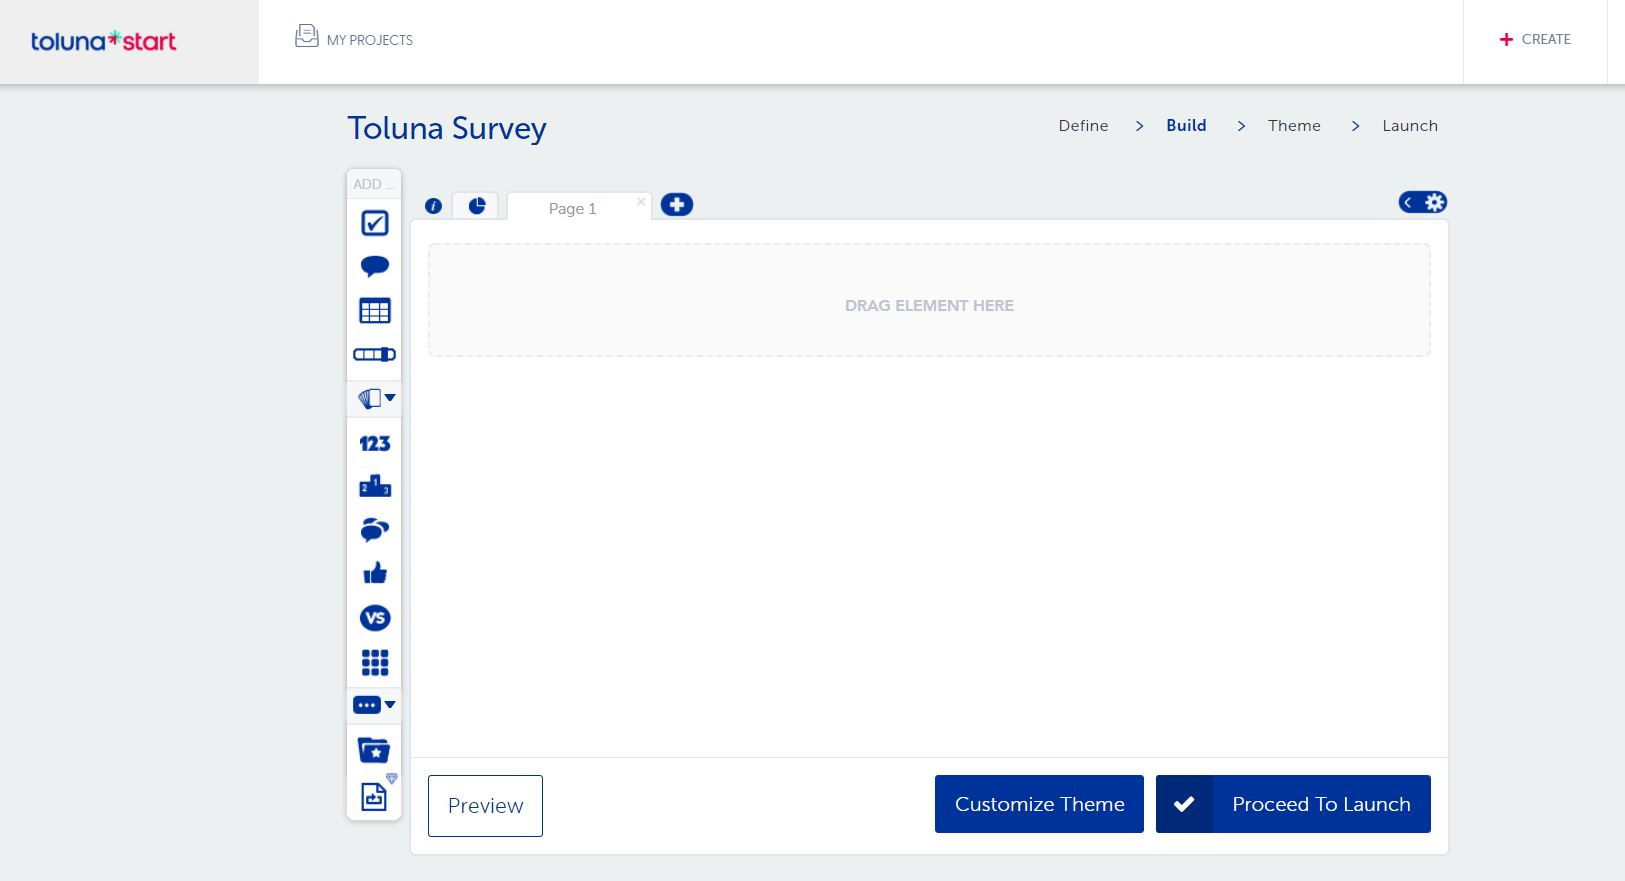 Toluna Start Software - Build your own survey with an easy to use drag-and-drop modules.